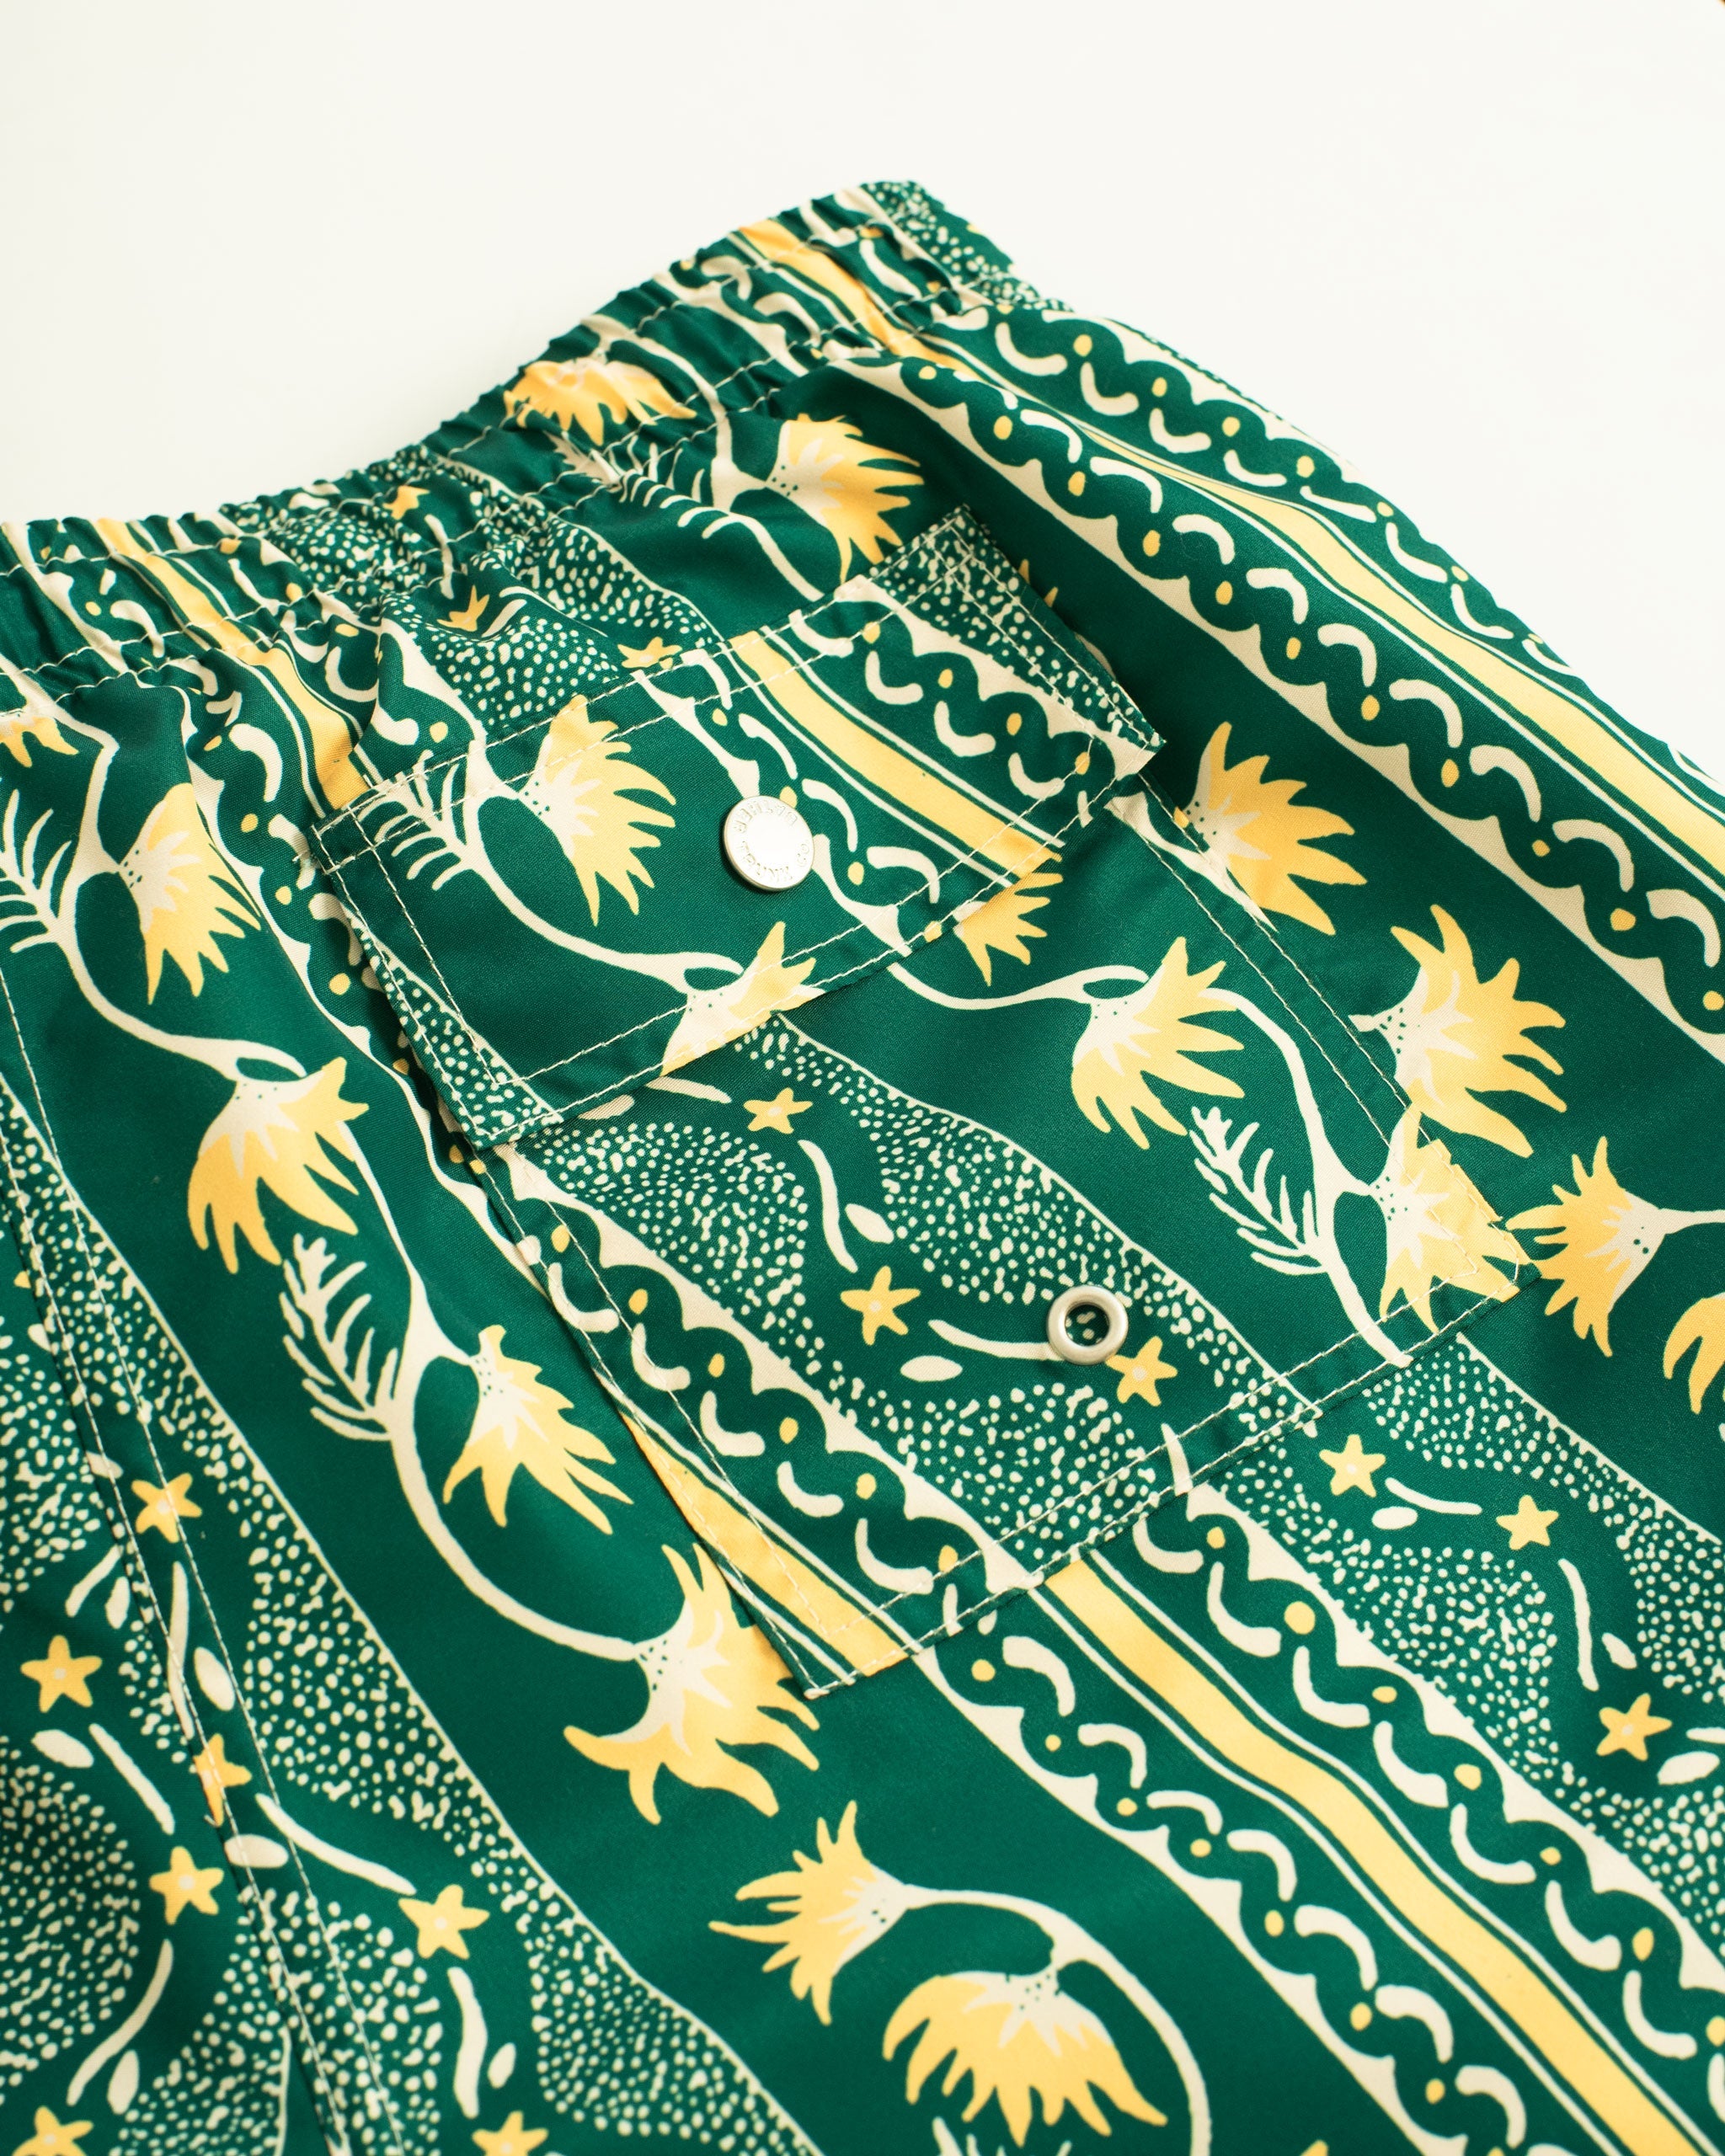 Back Pocket shot of Green swim trunk with yellow and white classic stripe features intricate mosaics of flowers, sand, and starfish